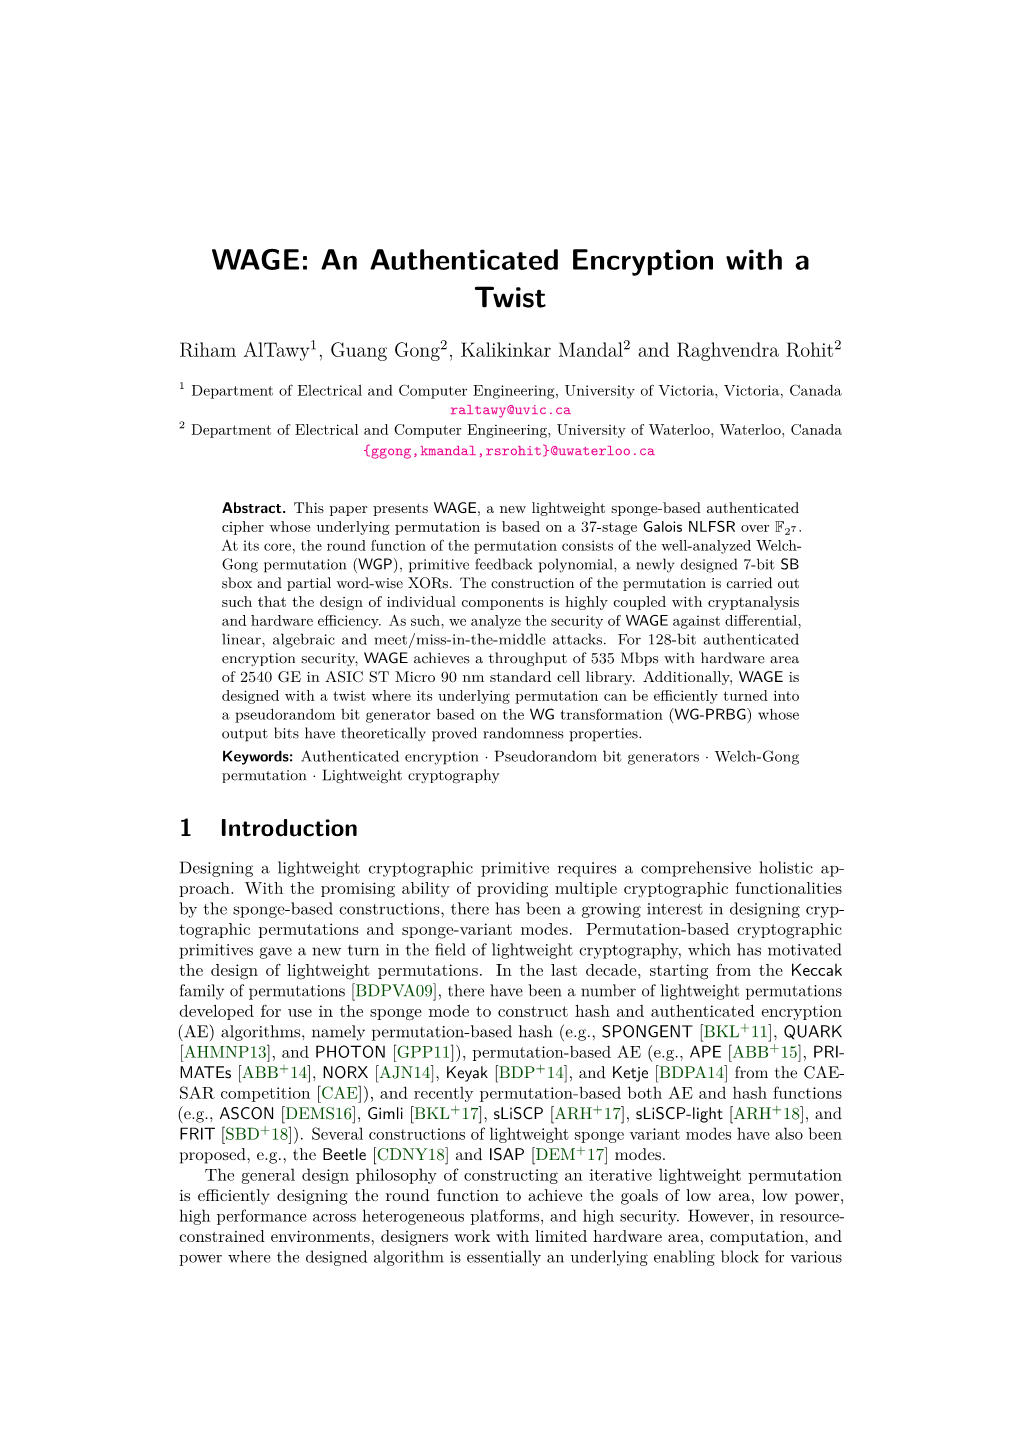 WAGE: an Authenticated Encryption with a Twist